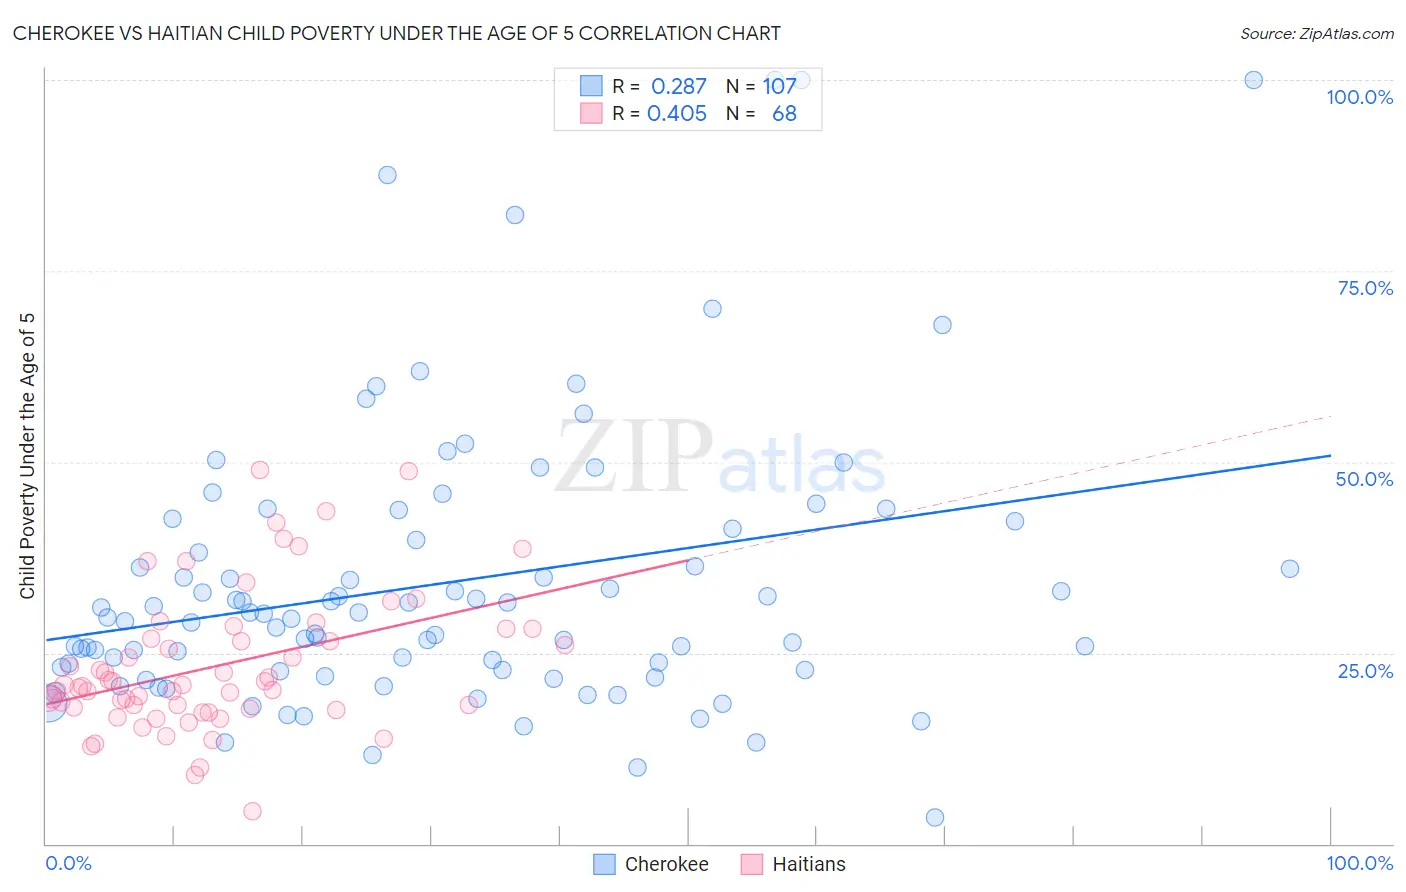 Cherokee vs Haitian Child Poverty Under the Age of 5